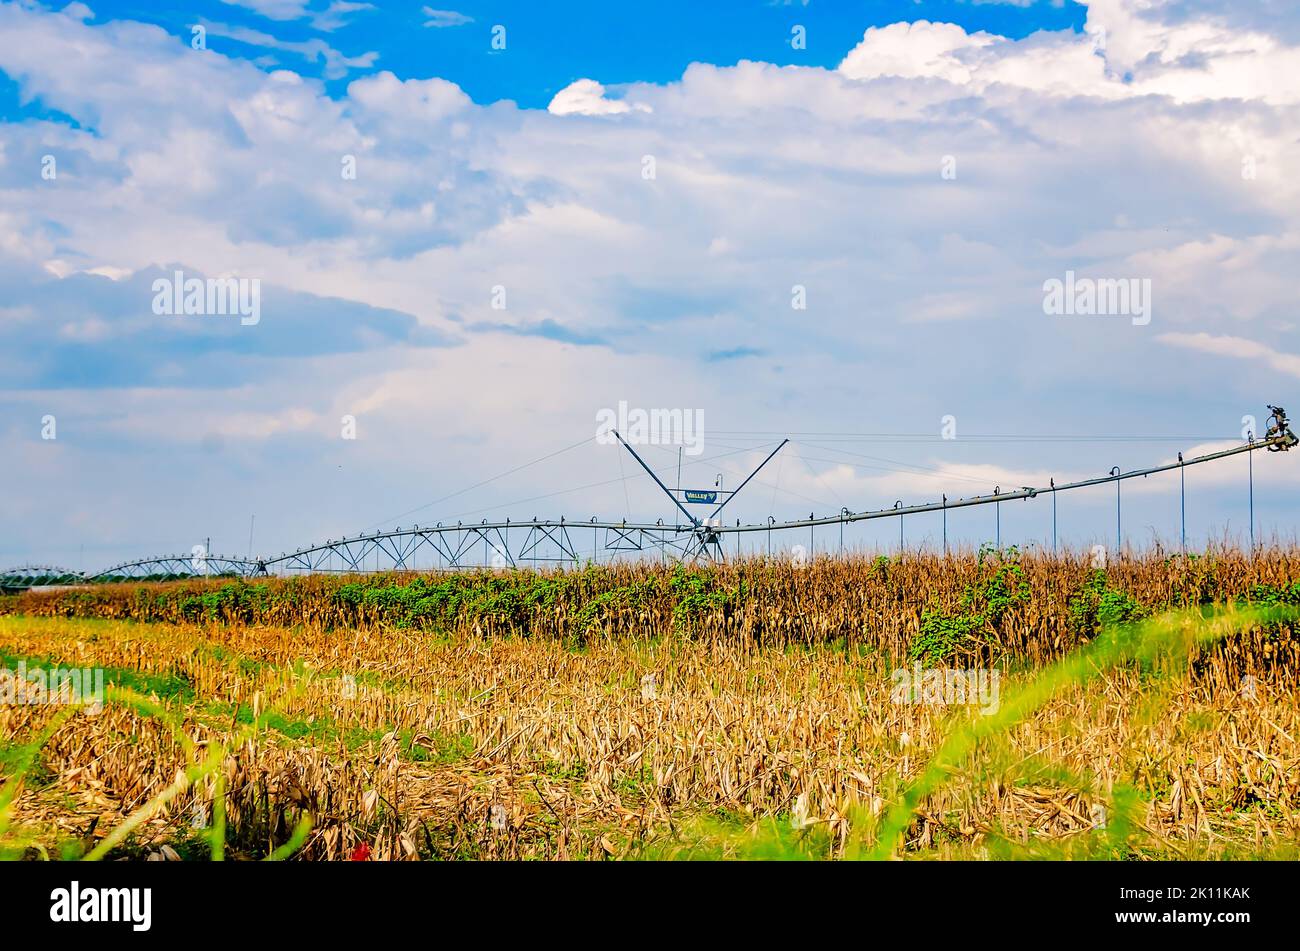 A crop irrigation system stands in a field, Sept. 8, 2022, in Fairhope, Alabama. Baldwin County is home to more than 800 farms. Stock Photo